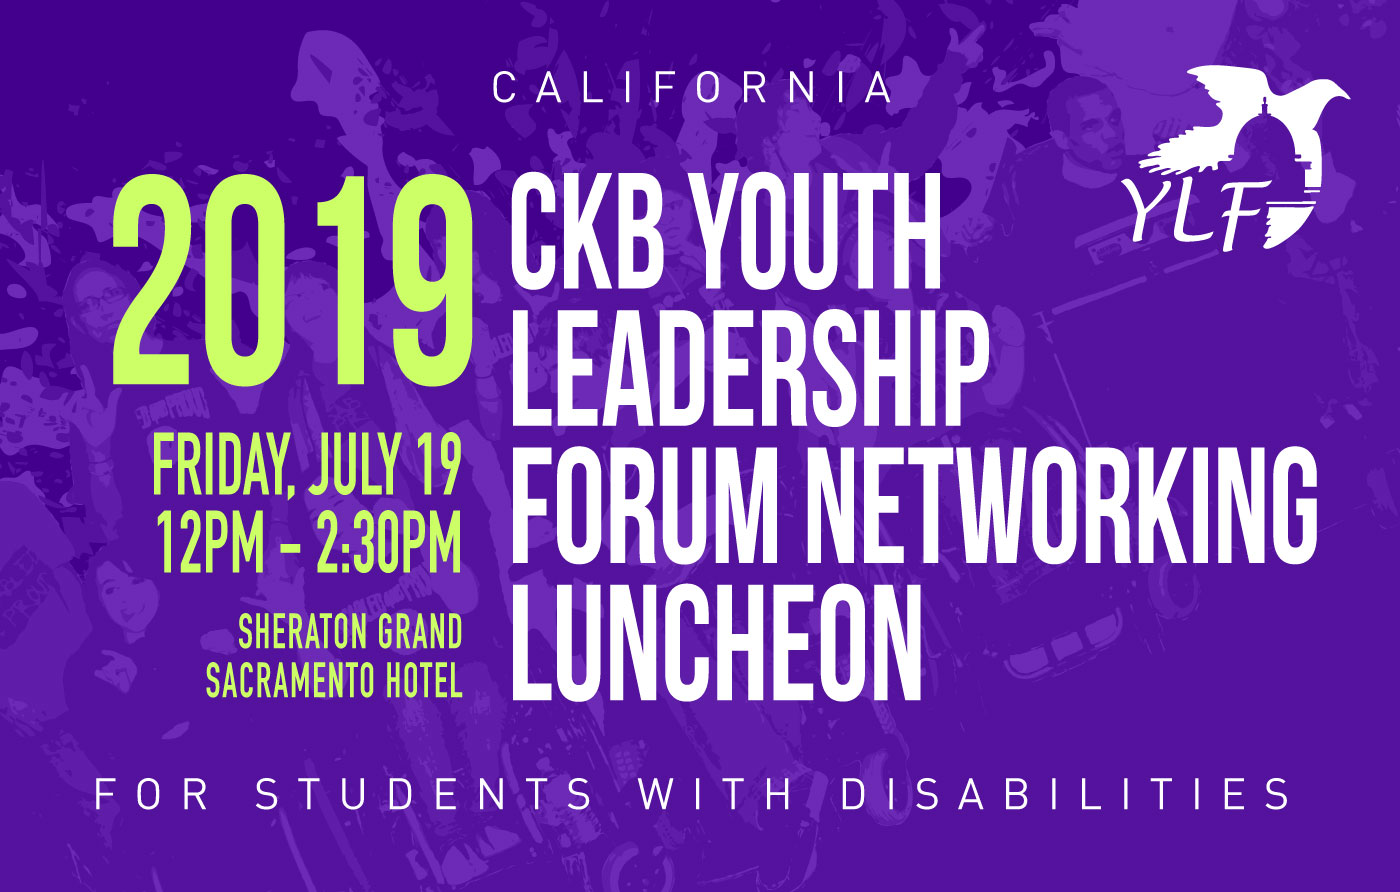 California for Students with Disabilities. 2019 CKB Youth Leadership Forum Networking Luncheon. Friday, July 19. 12pm to 2:30pm. Sheraton Grand Sacramento Hotel.